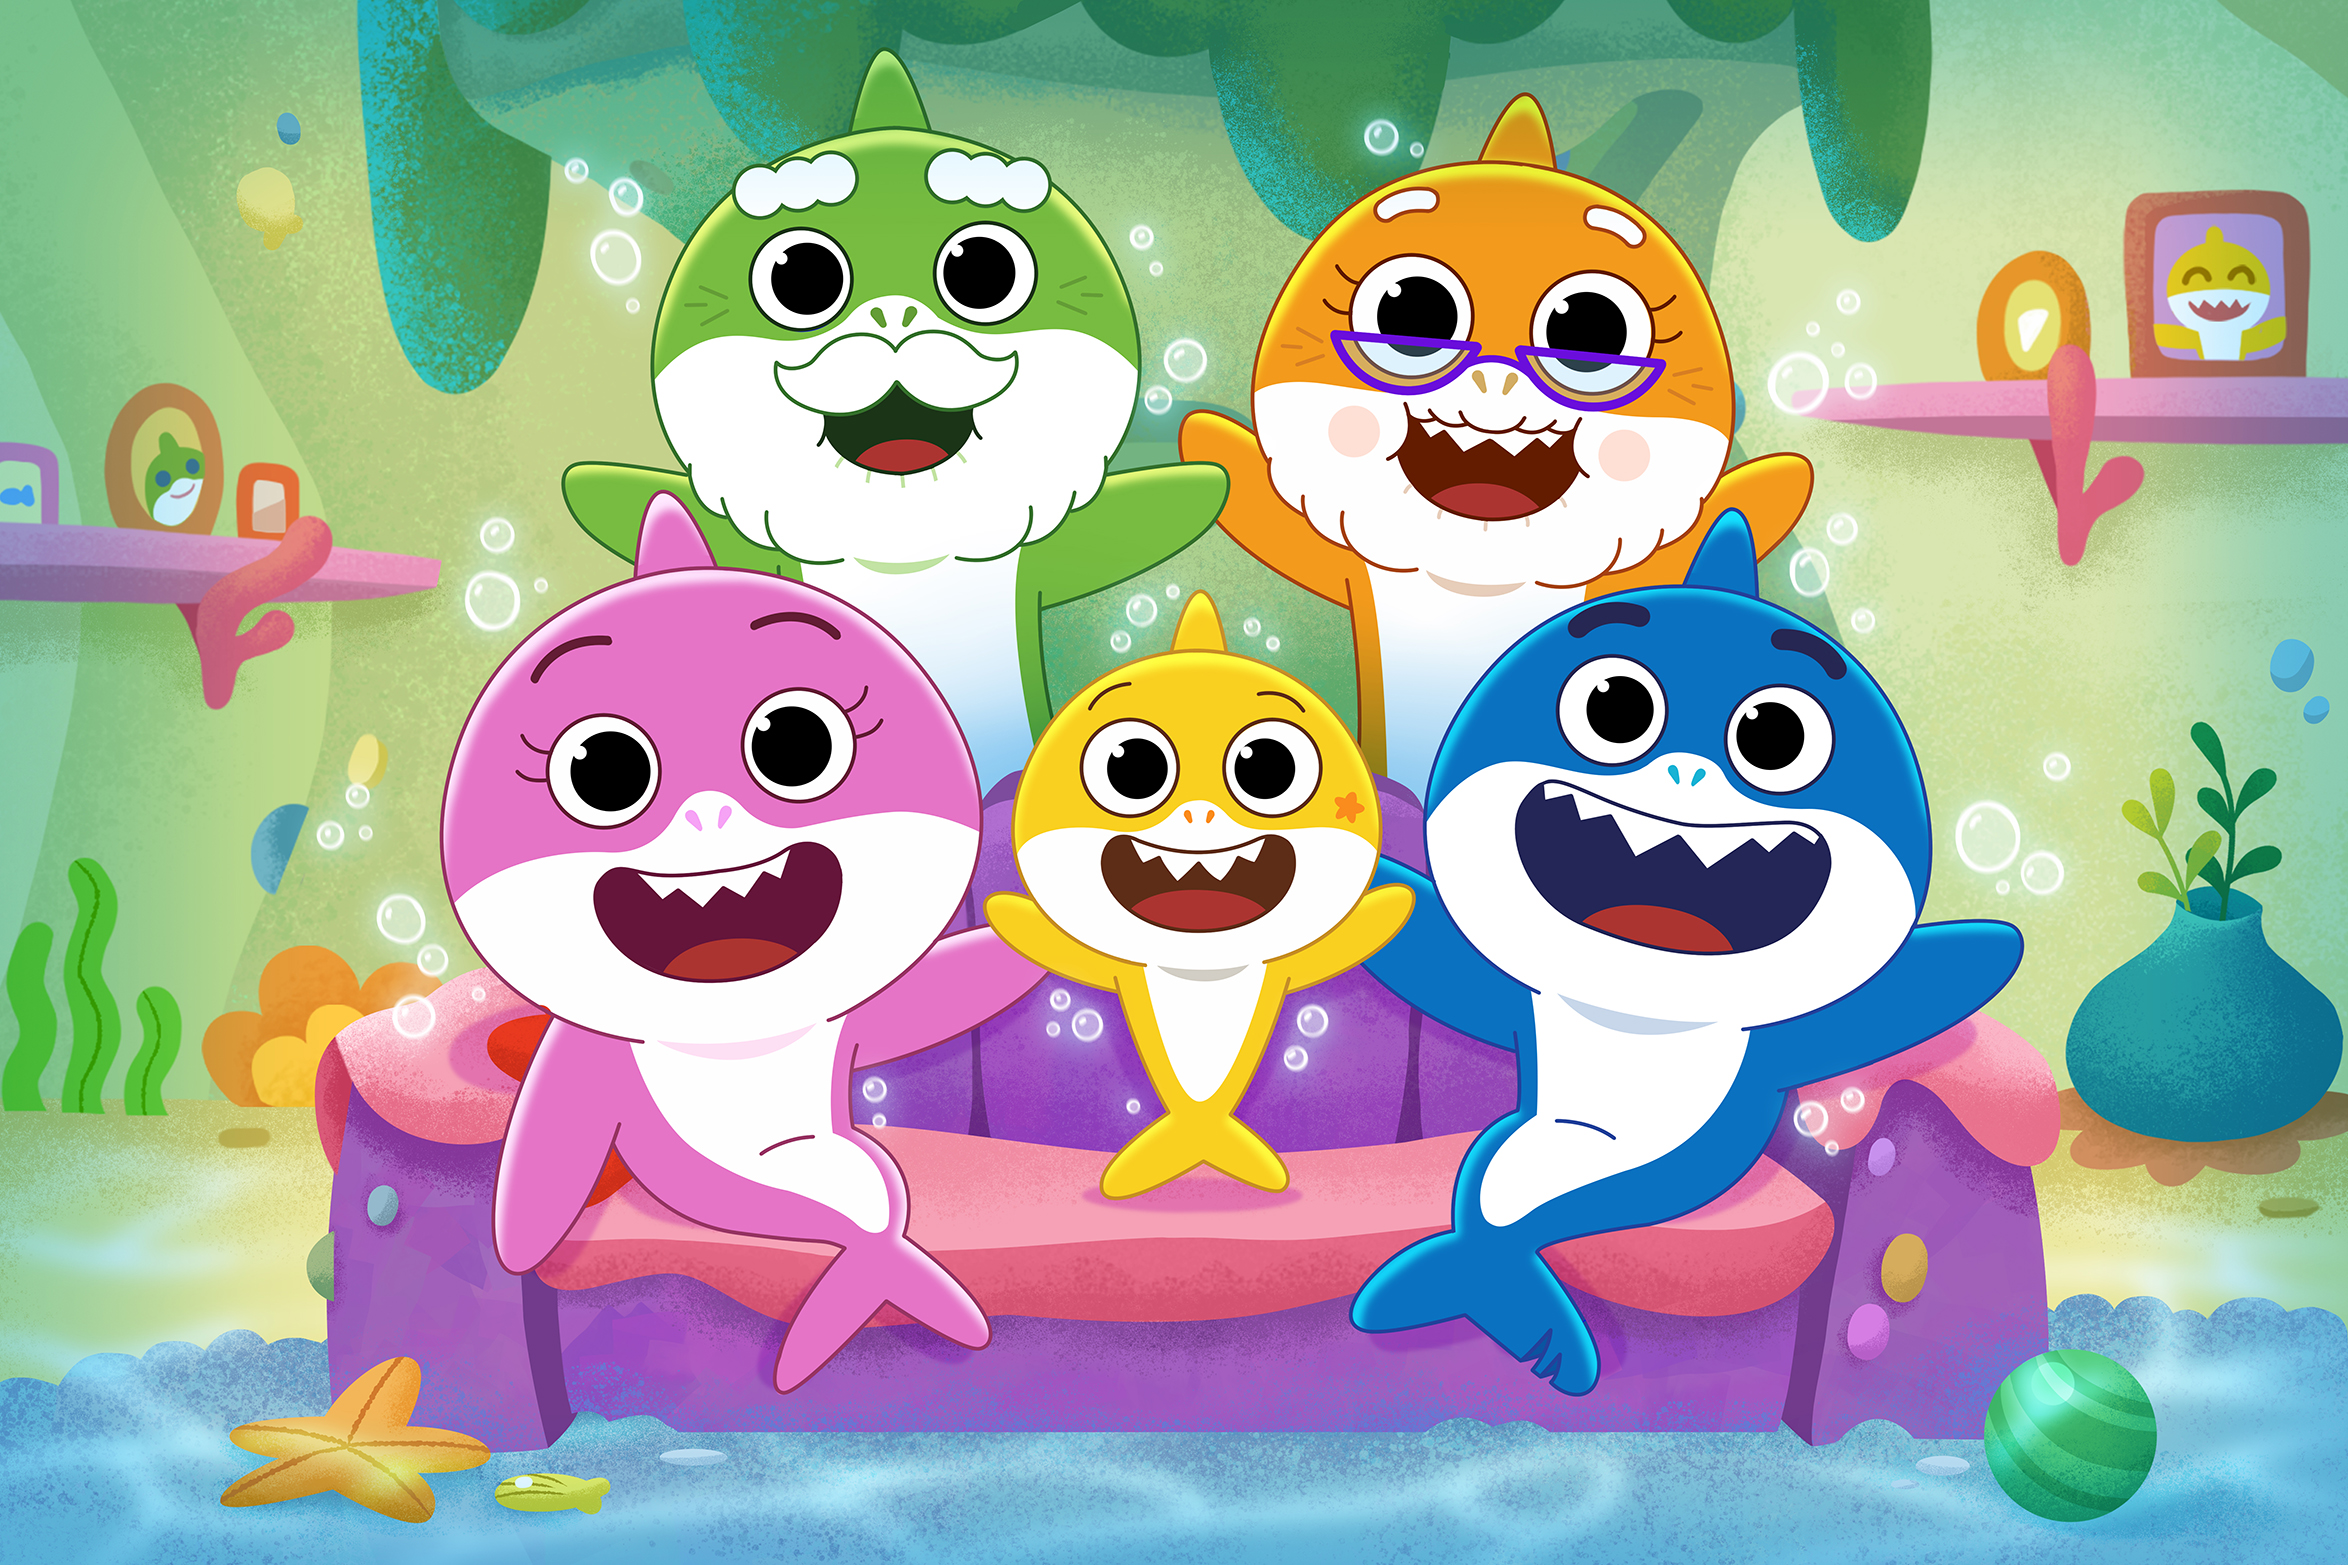 Pinkfong's Baby Shark gets Gold Certified in France - The Daily Rind